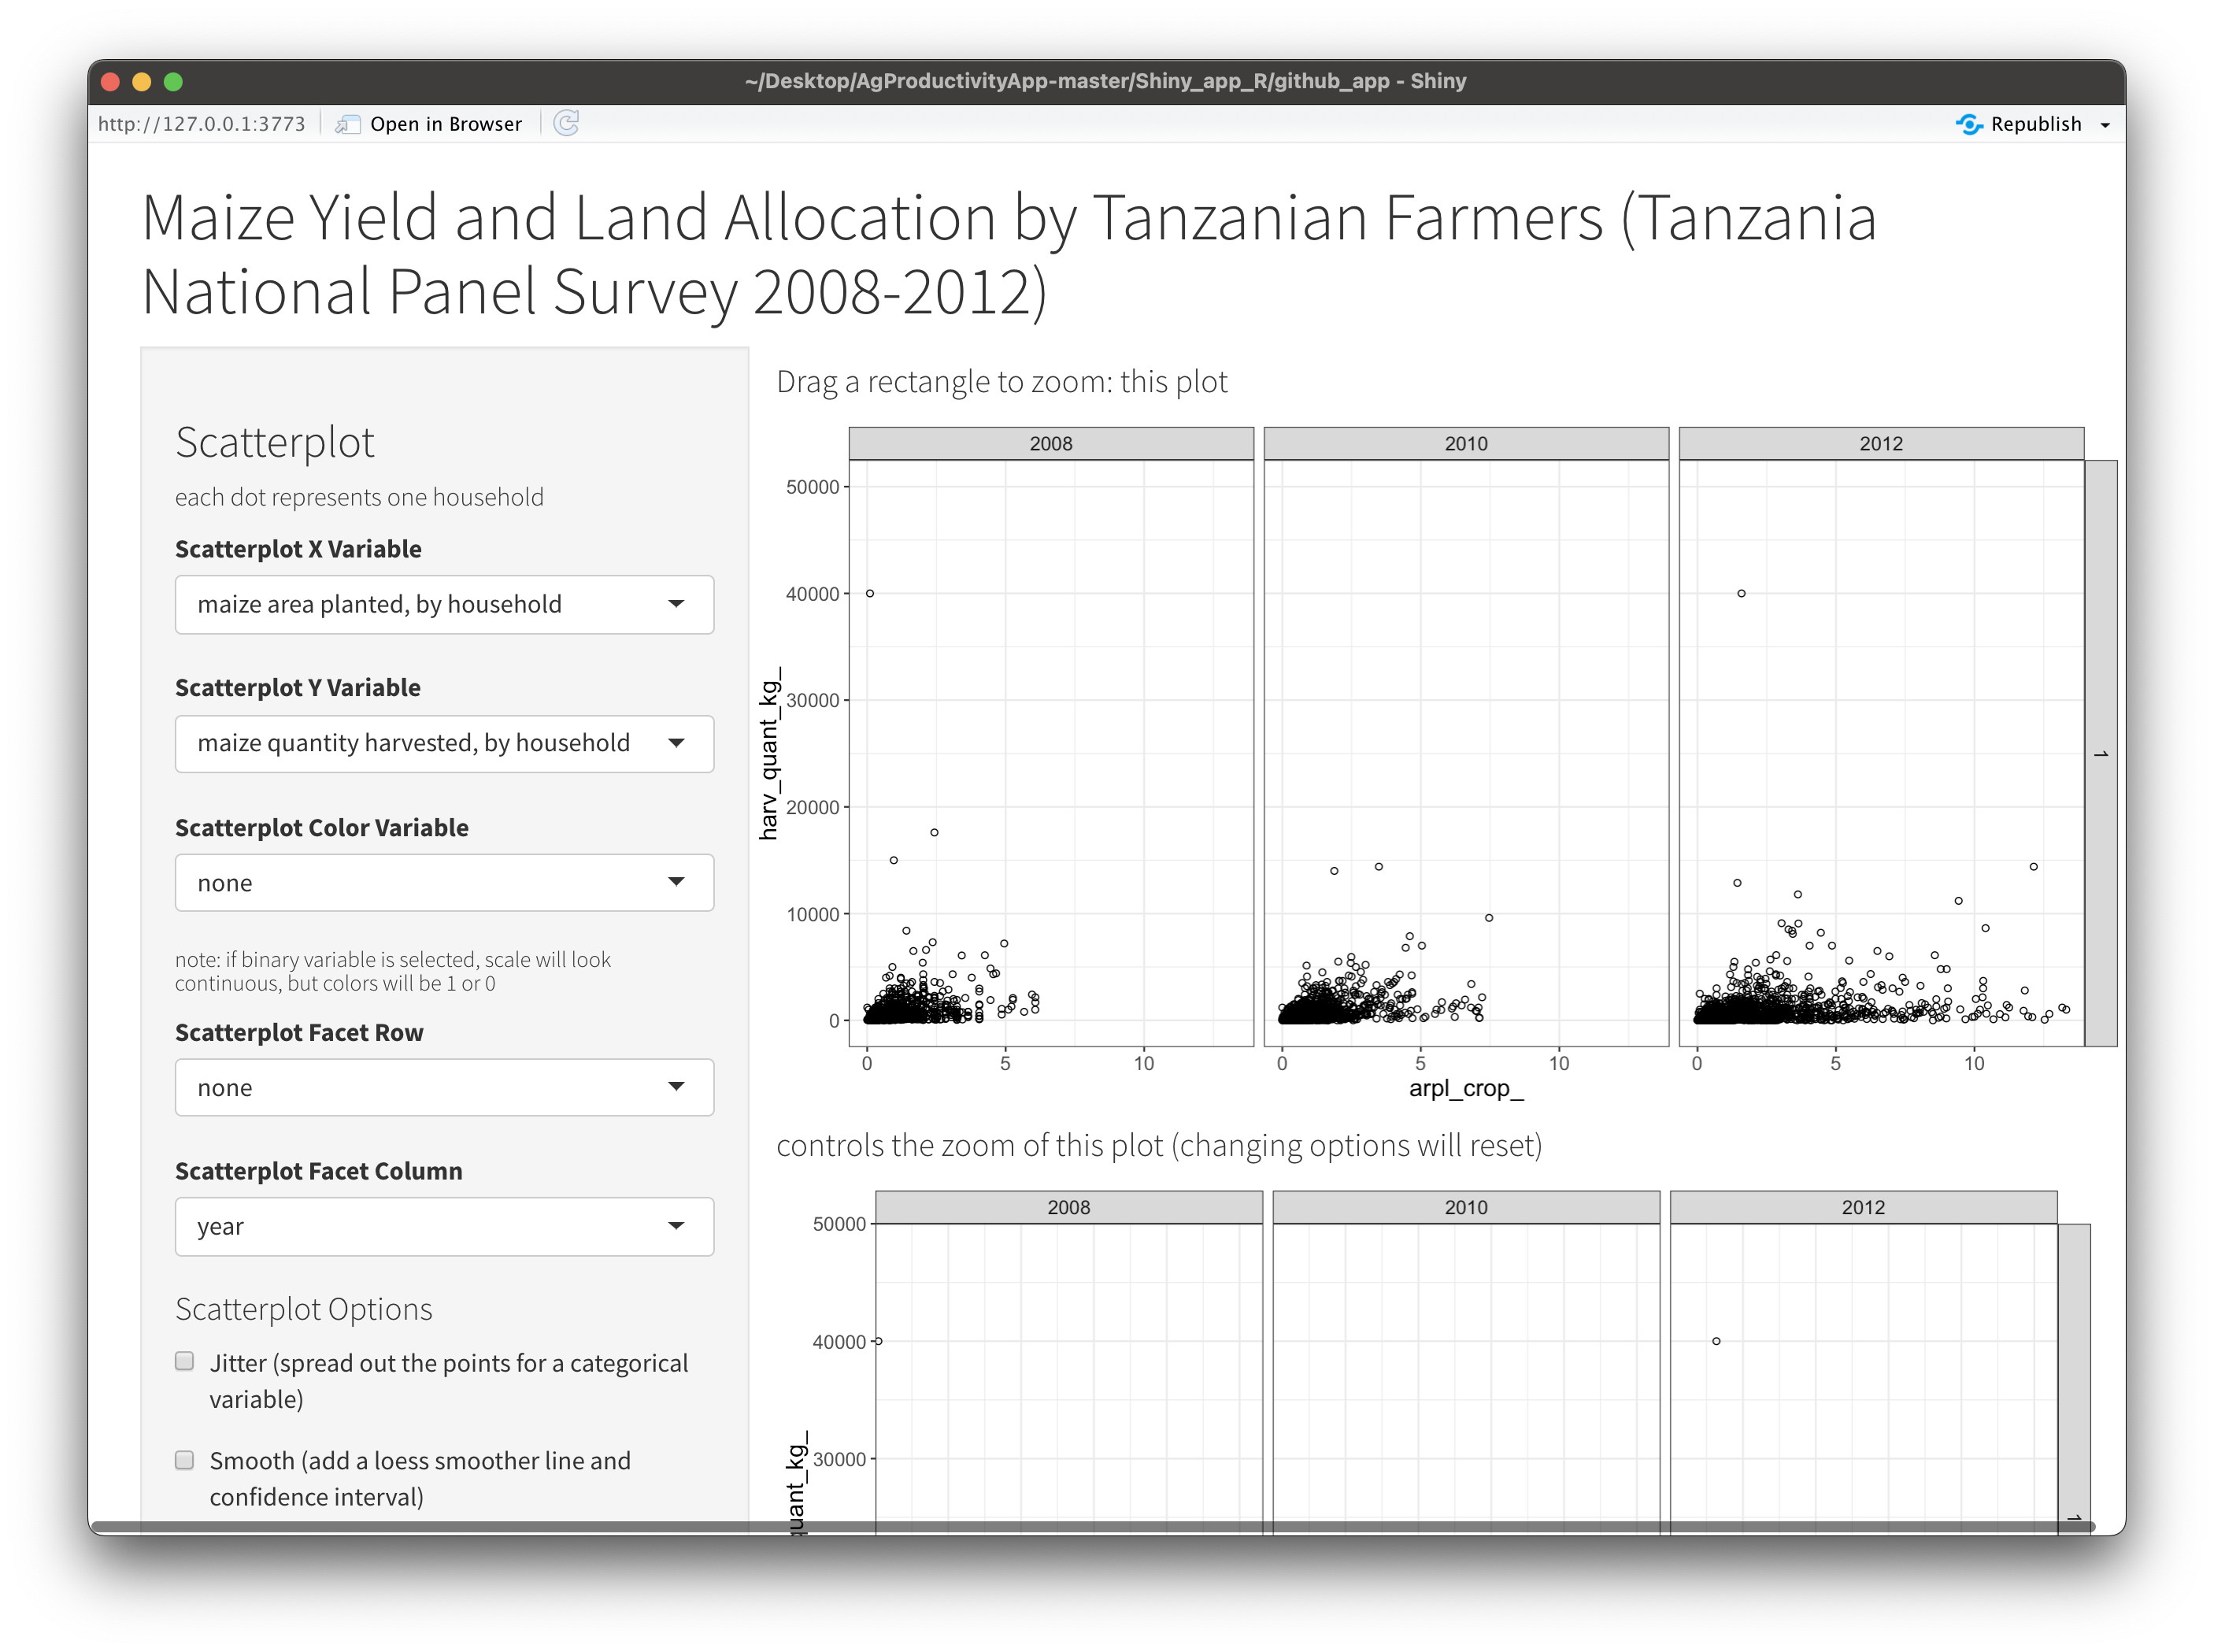 Image 3 - Agricultural productivity in Tanzania dashboard